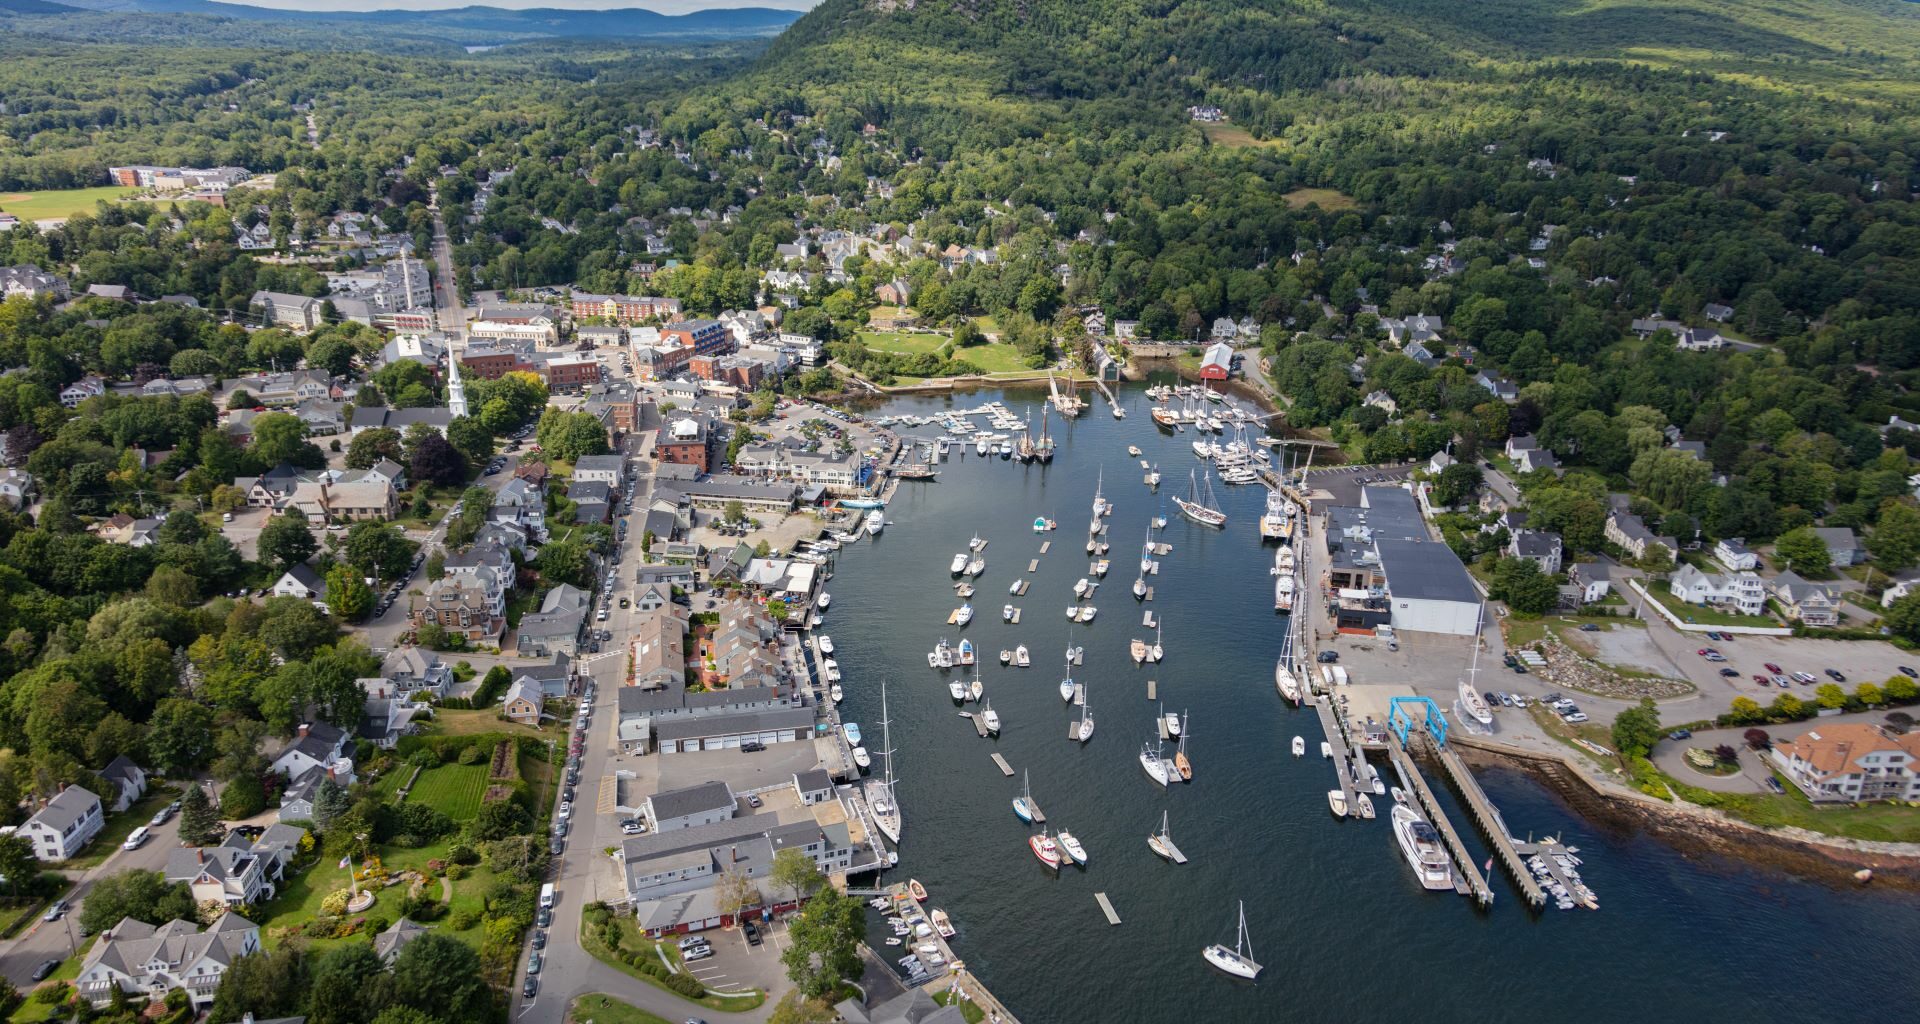 Aerial view of Camden Harbor showing how close buildings are to the water